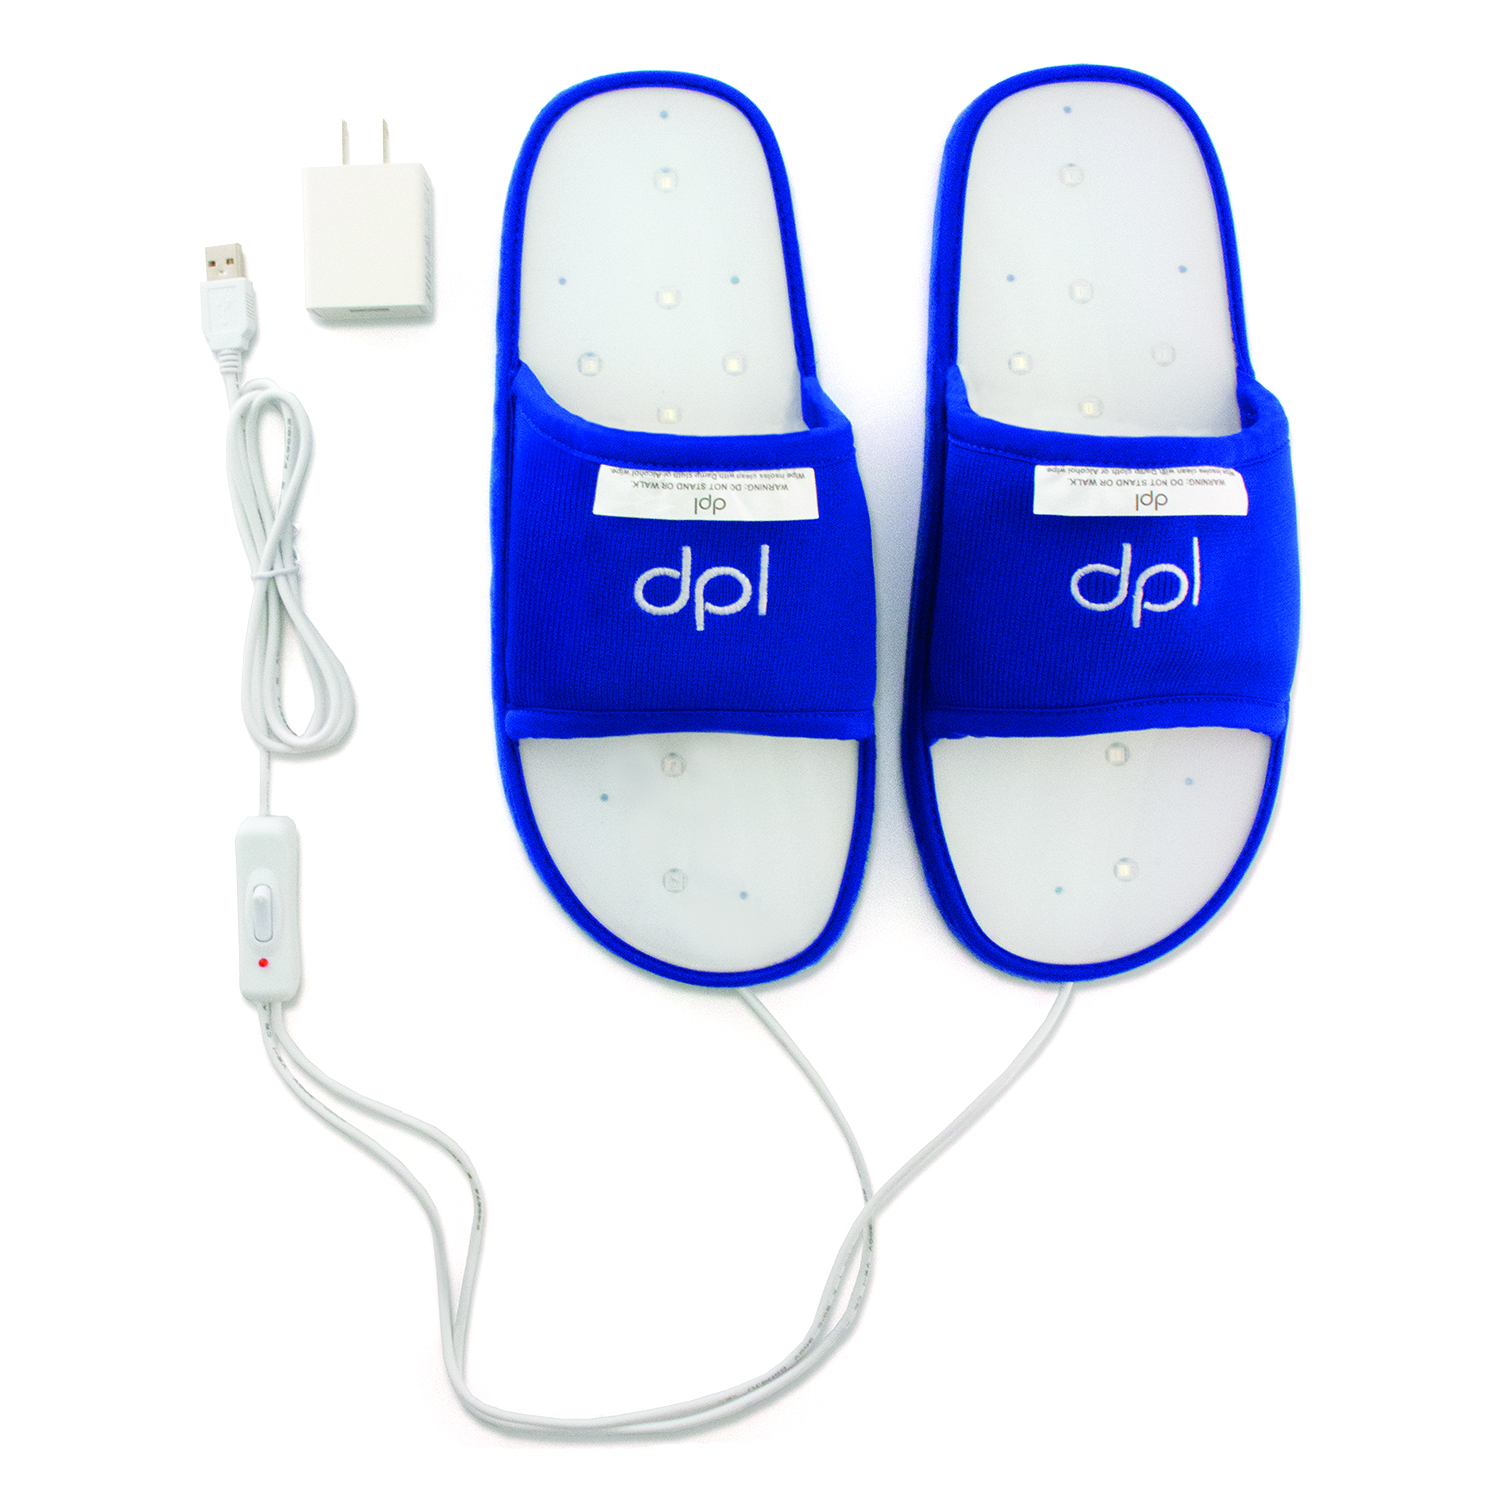 slippers for foot pain